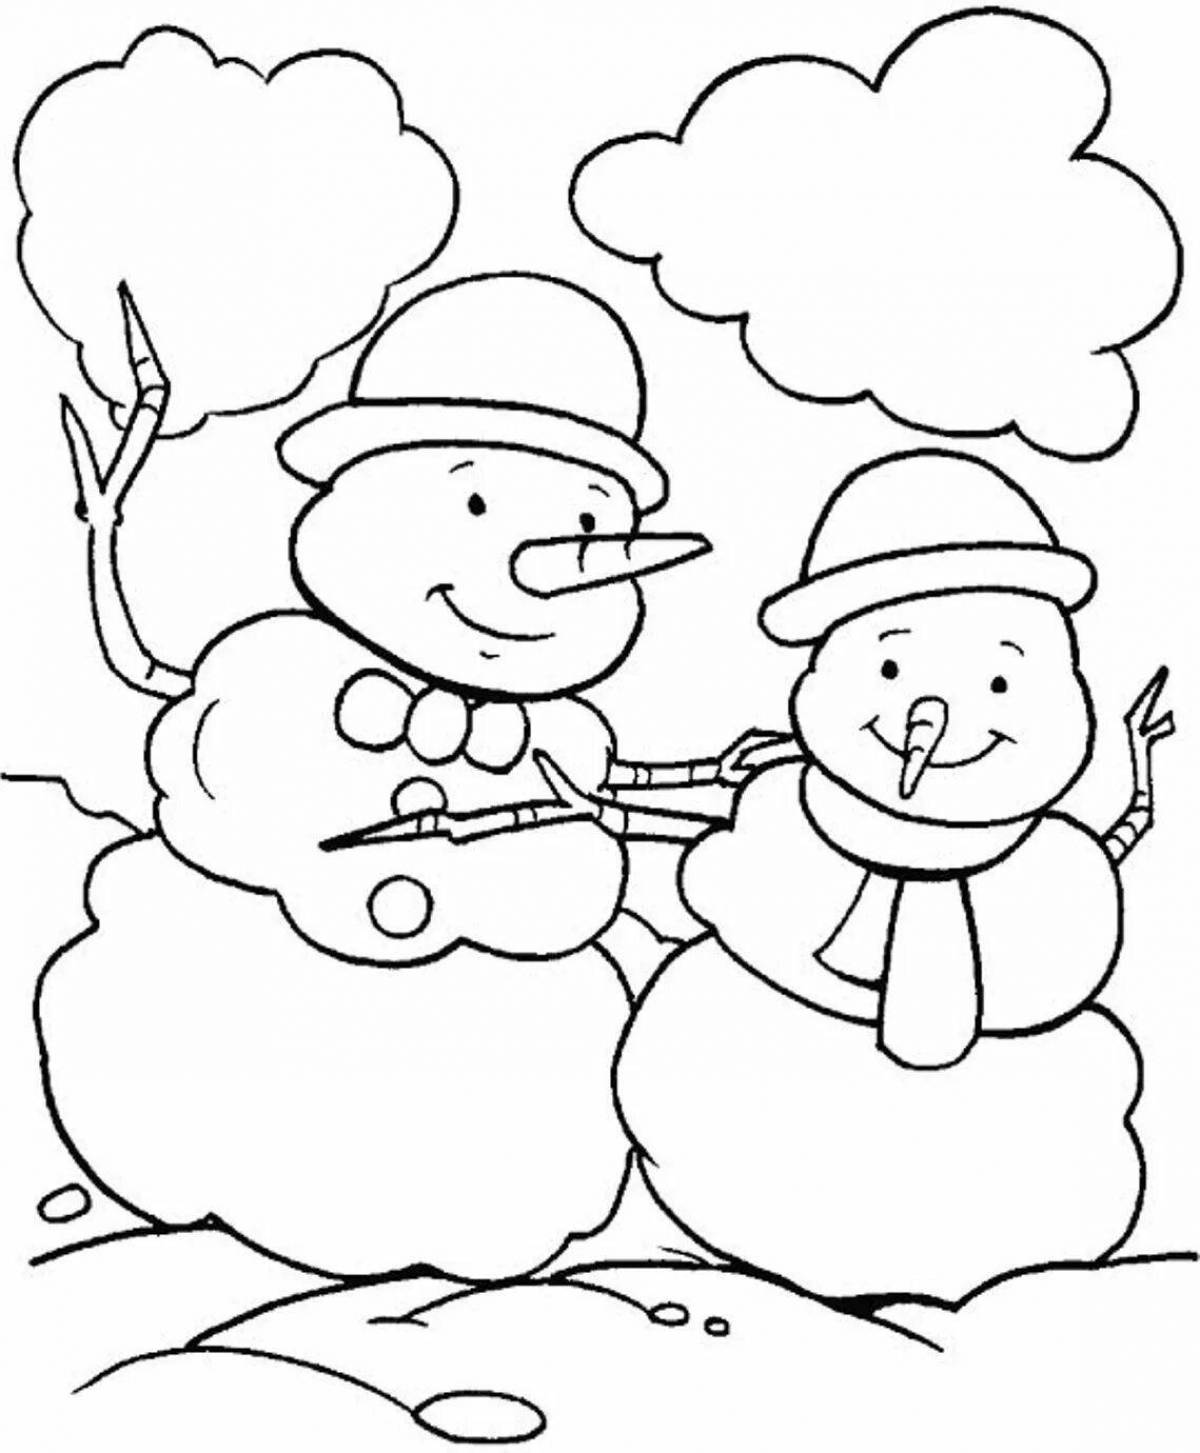 Coloring book birthday of a cheerful snowman